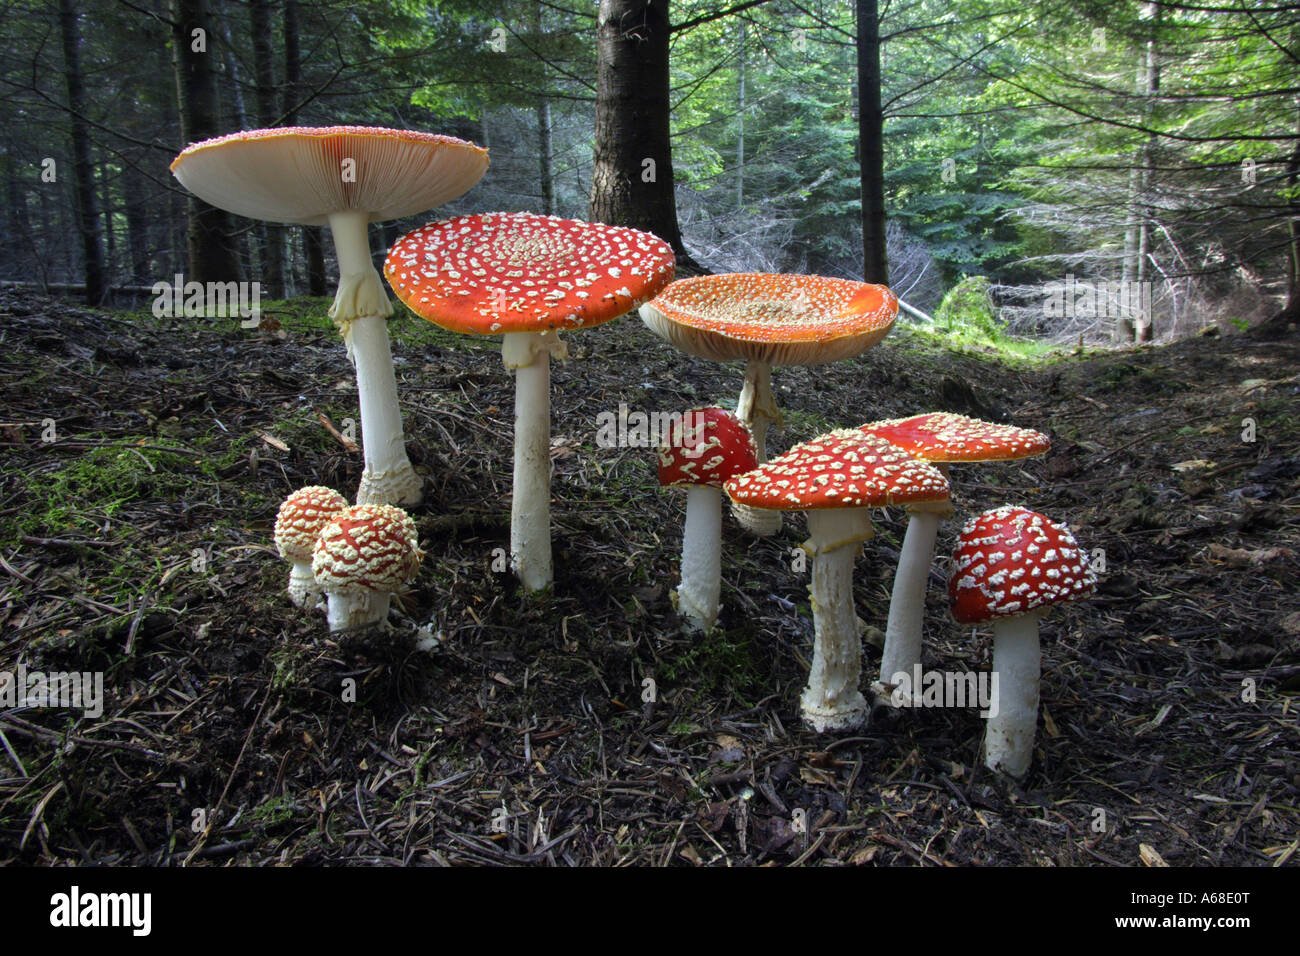 Agaric Fly (Amanita muscaria), groupe d'toadstoals de différentes tailles Banque D'Images